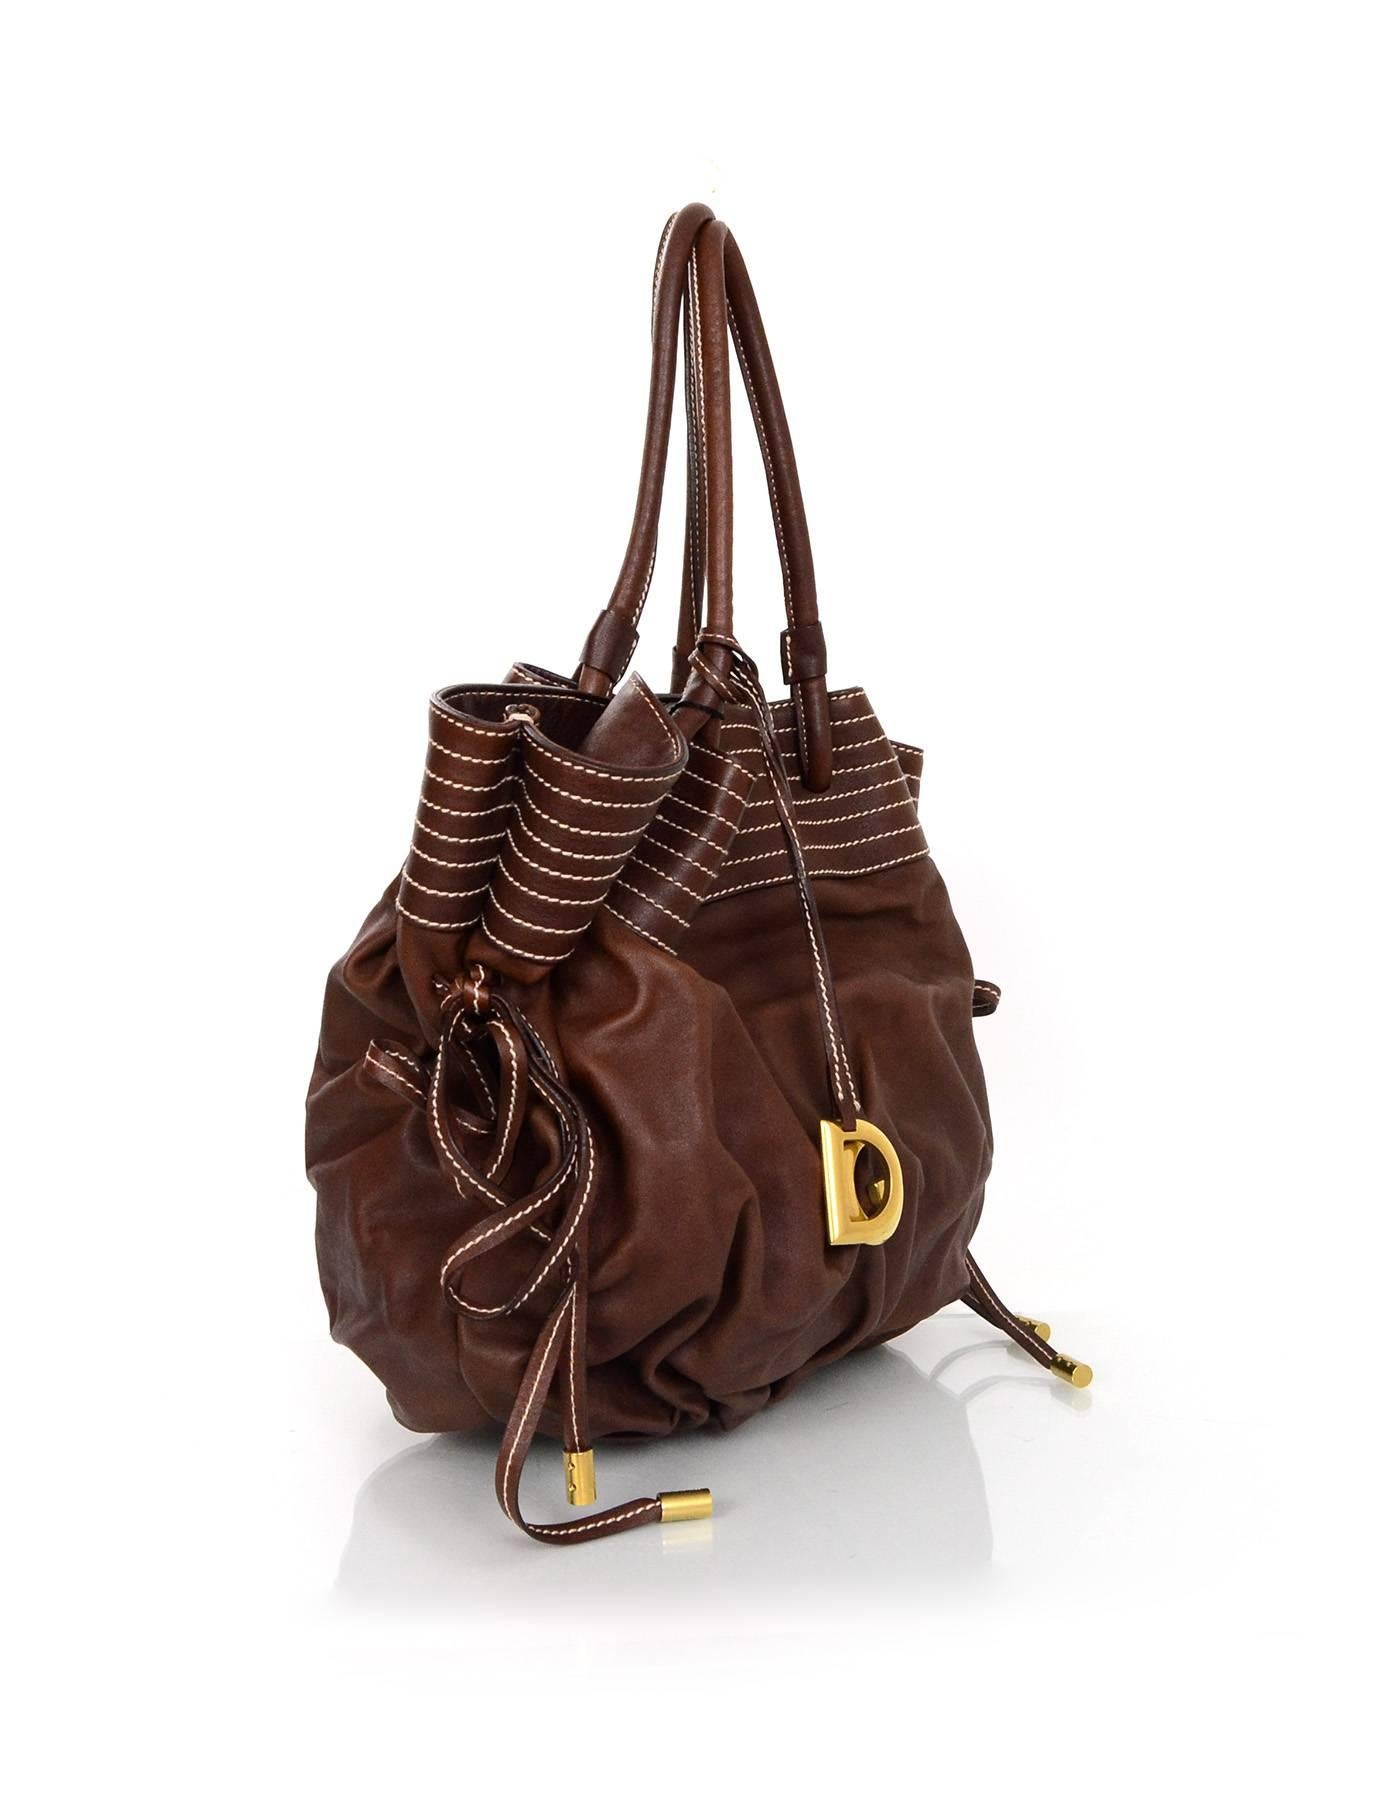 Dolce & Gabbana NEW Brown Leather Drawstring Bag
Features removable D & G bag charm and contrast white stitching

Made In: Italy
Color: Brown
Hardware: Goldtone 
Materials: Leather
Lining: Red canvas
Closure/Opening: Side drawstring